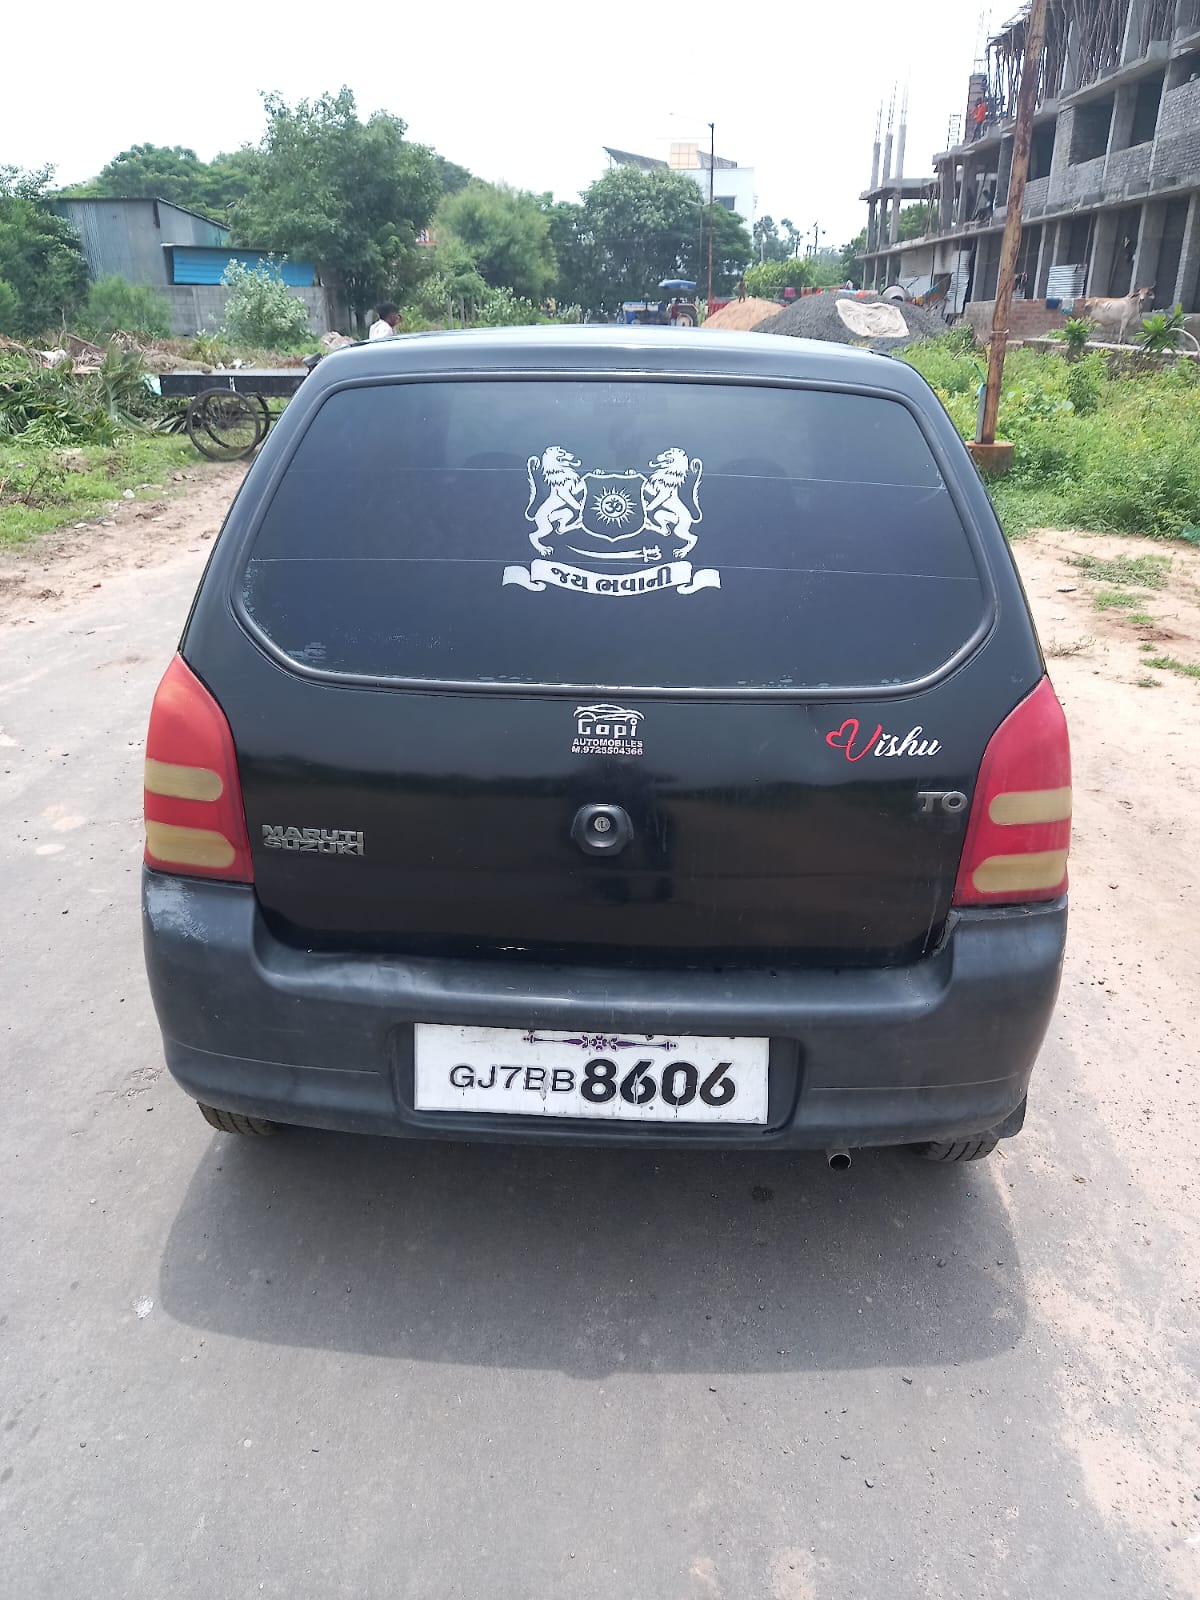 Details View - Maruti Suzuki Car photos - reseller,reseller marketplace,advetising your products,reseller bazzar,resellerbazzar.in,india's classified site,Maruti Suzuki Car, Maruti Suzuki Car in Gujarat , old Maruti Suzuki car, Used maruti Suzuki car